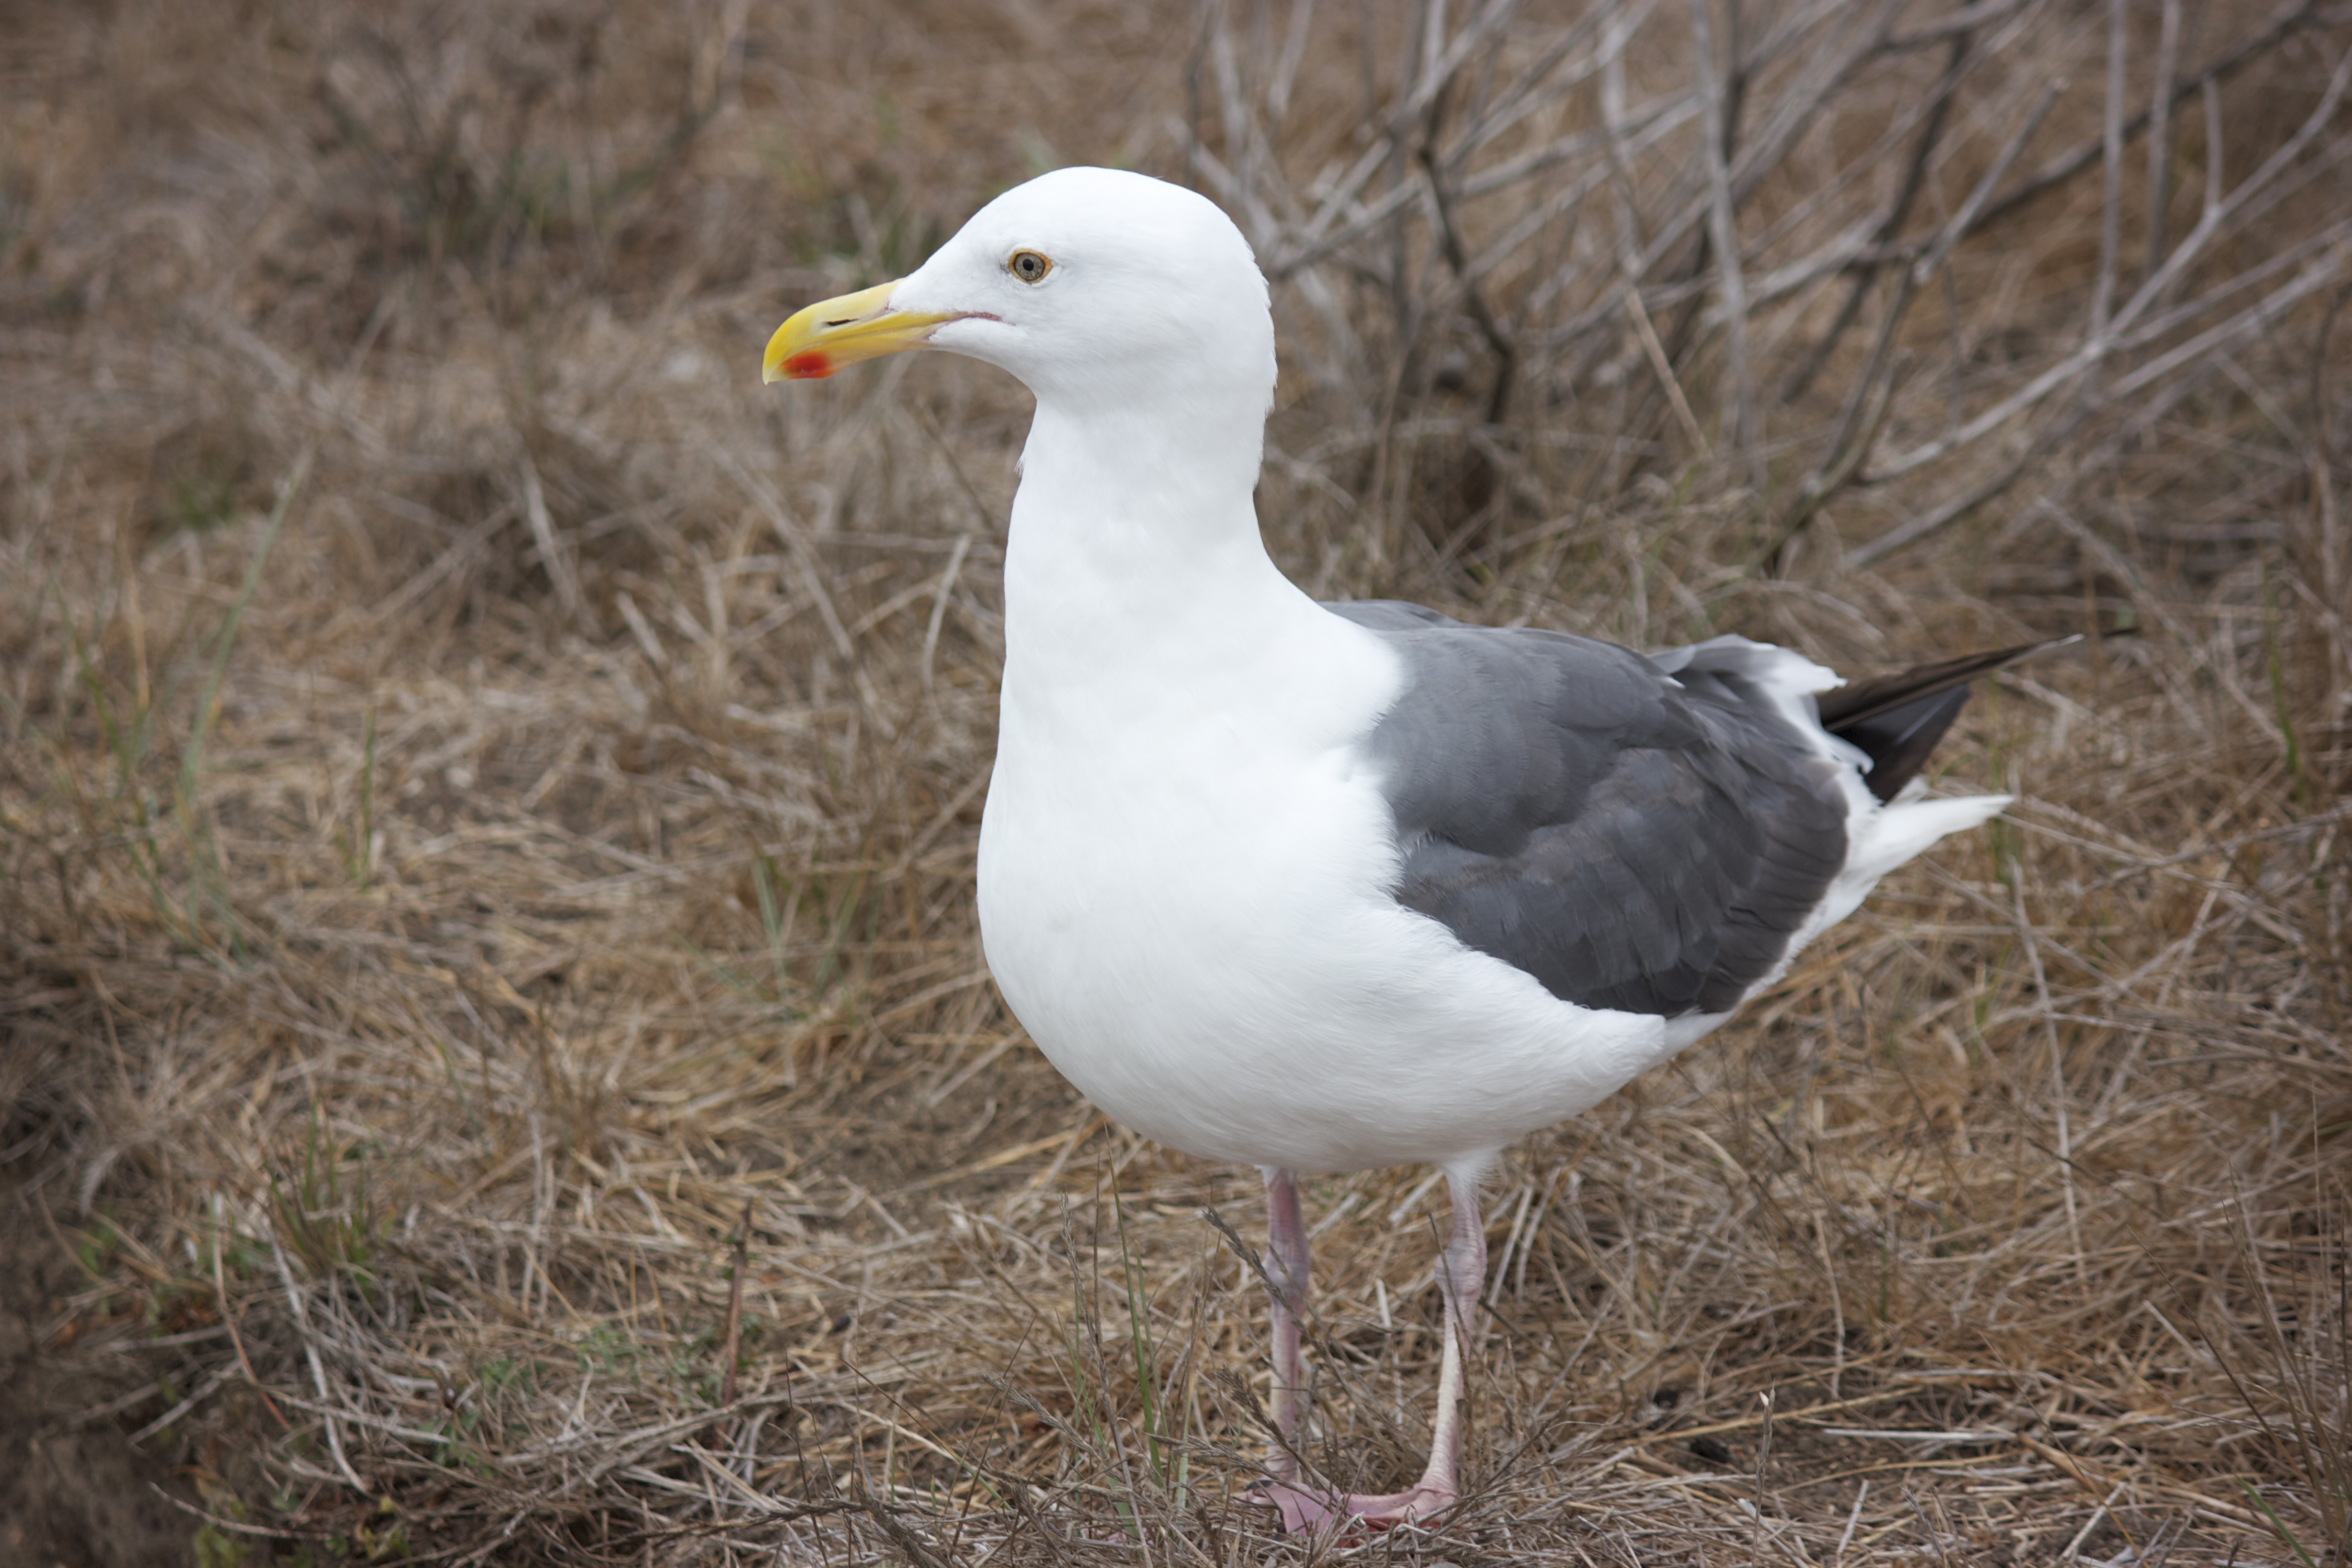 A male seagull, standing.